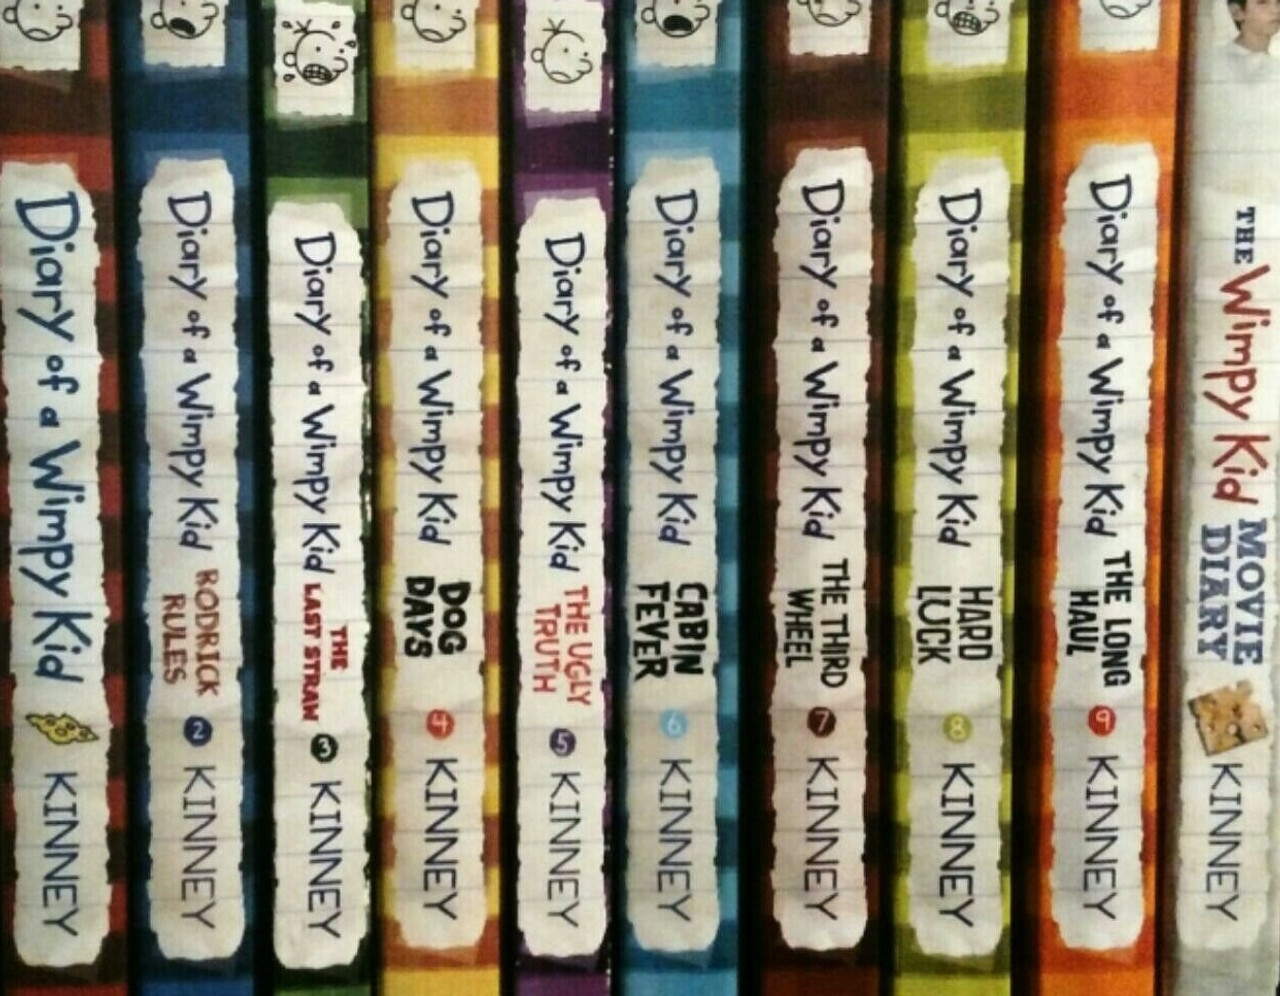 Diary of a Wimpy Kid: Books 1-16 Overview 